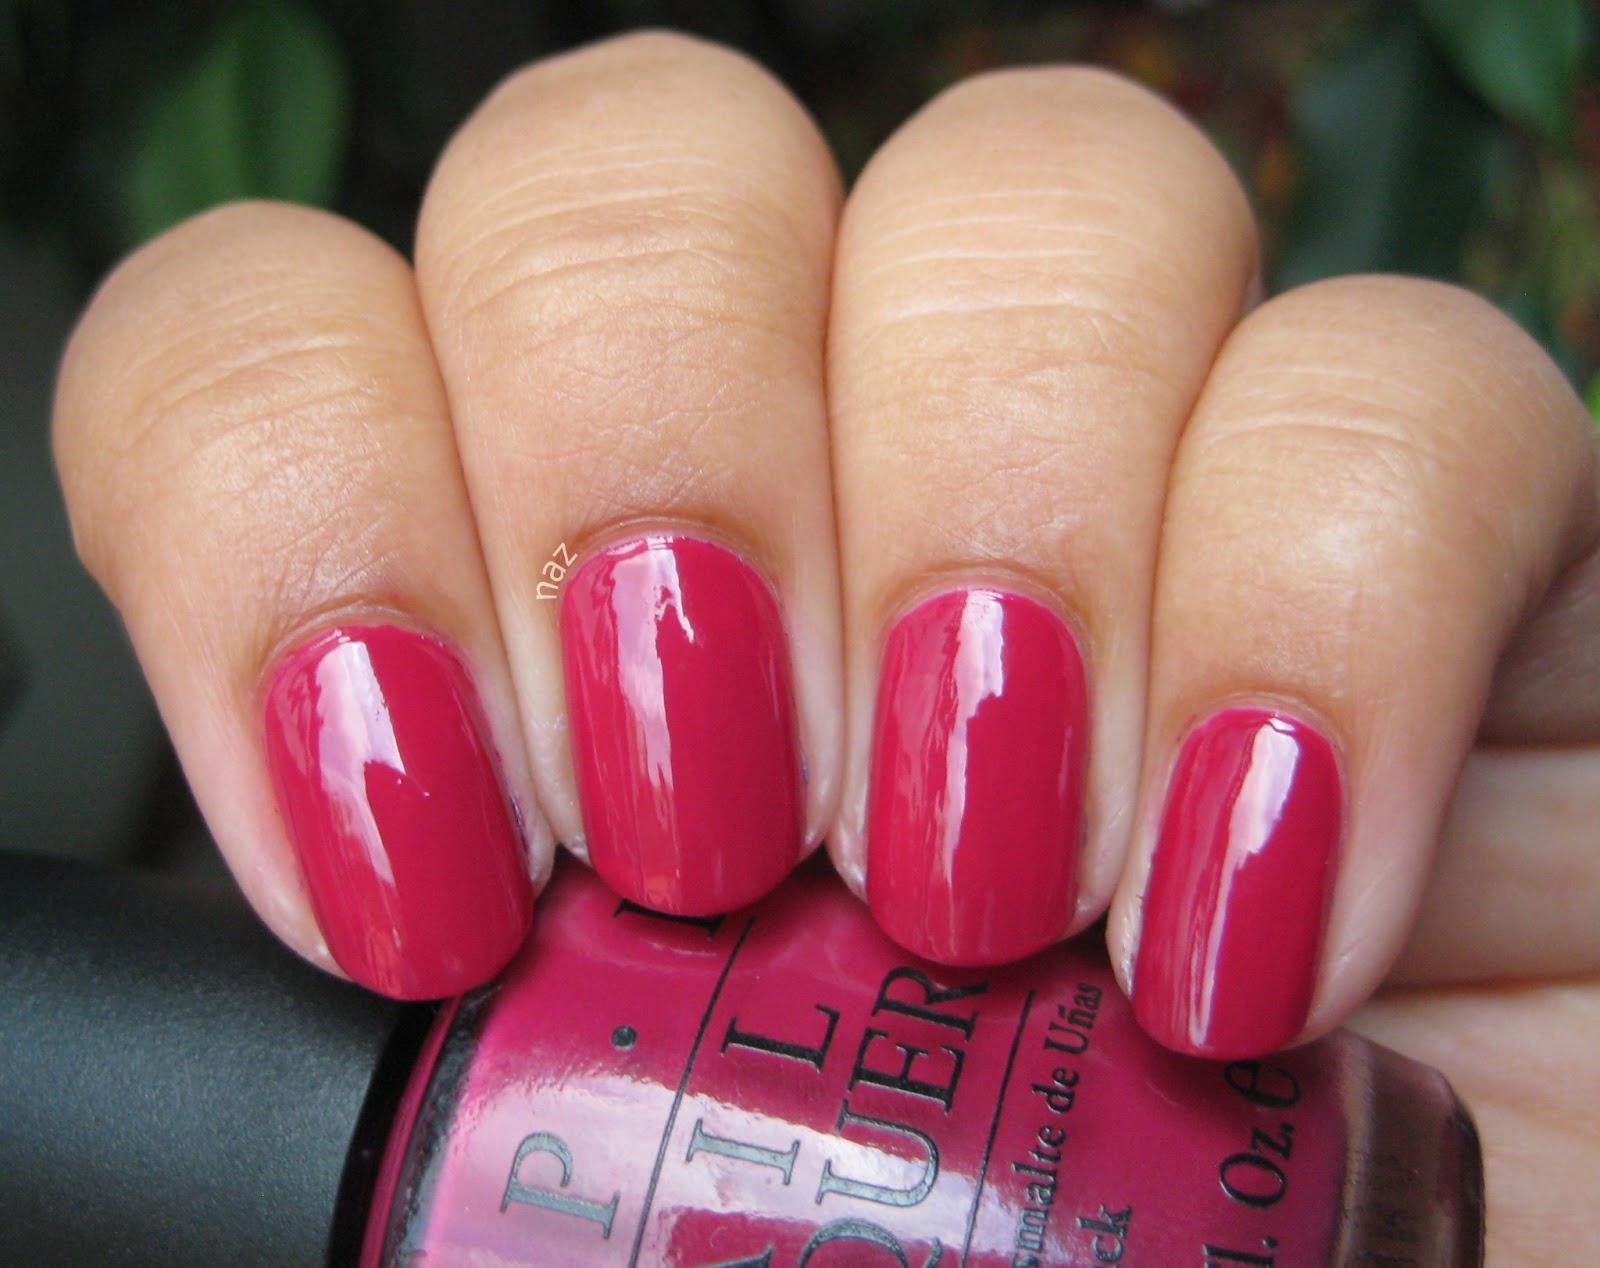 6. OPI "Miami Beet" from the South Beach Collection - wide 9